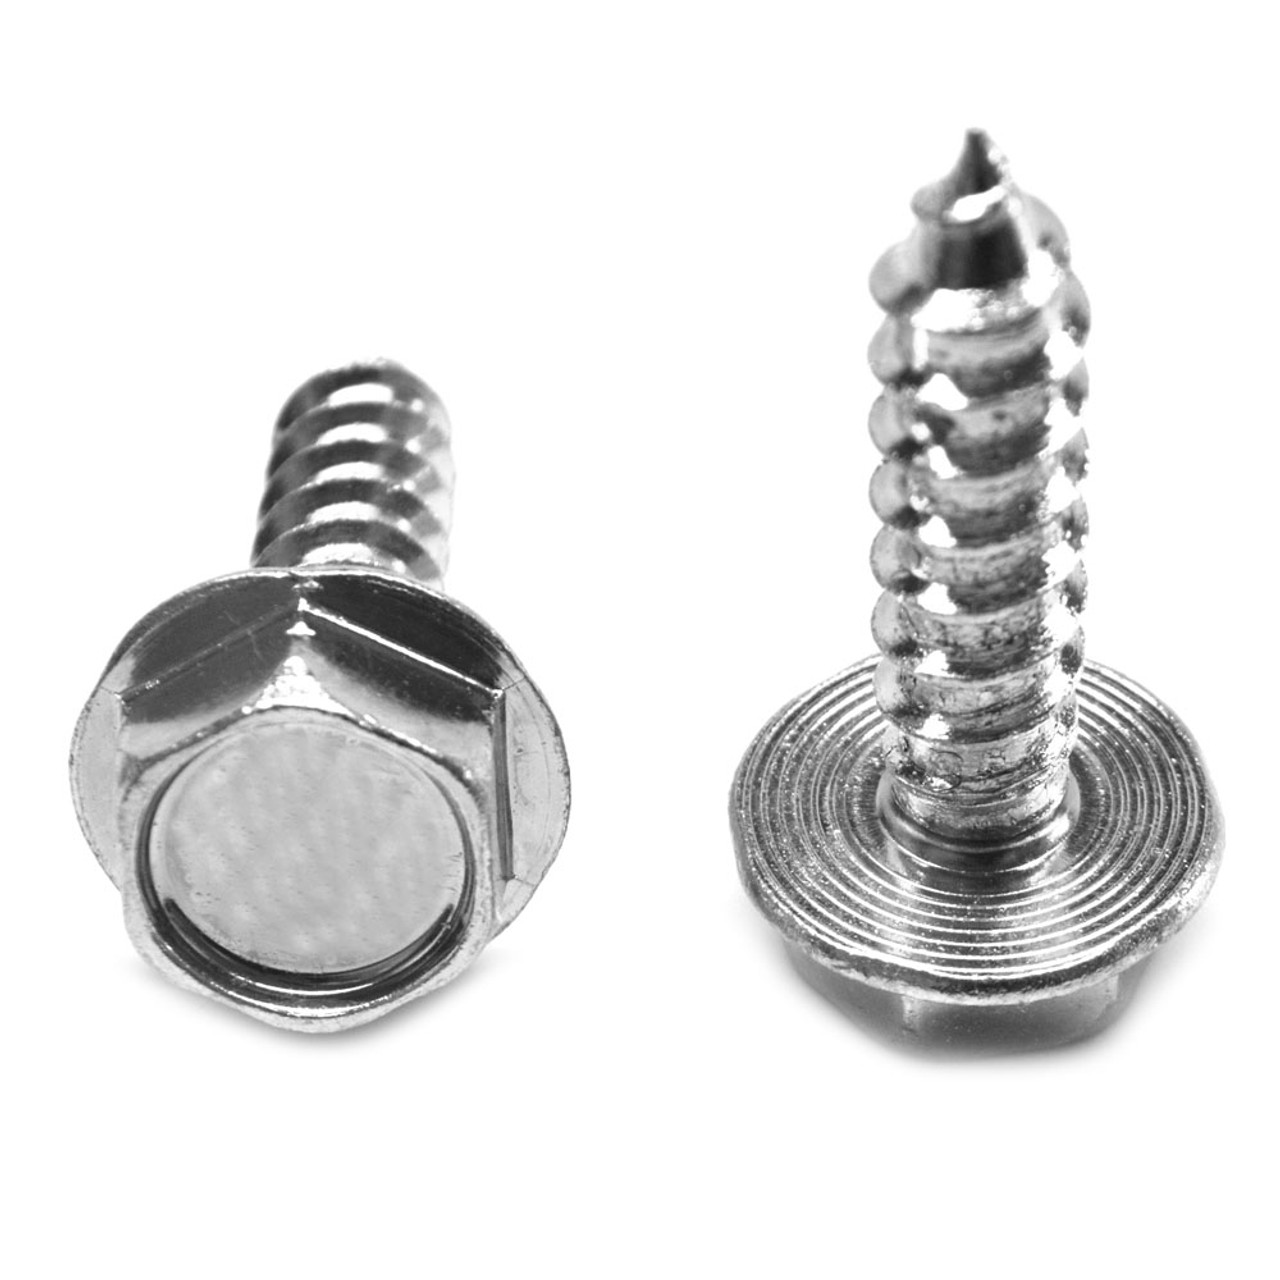 5/16-9 x 1 1/2 Hex Washer 7/16" AF Head Lag Screw Low Carbon Steel Zinc Plated